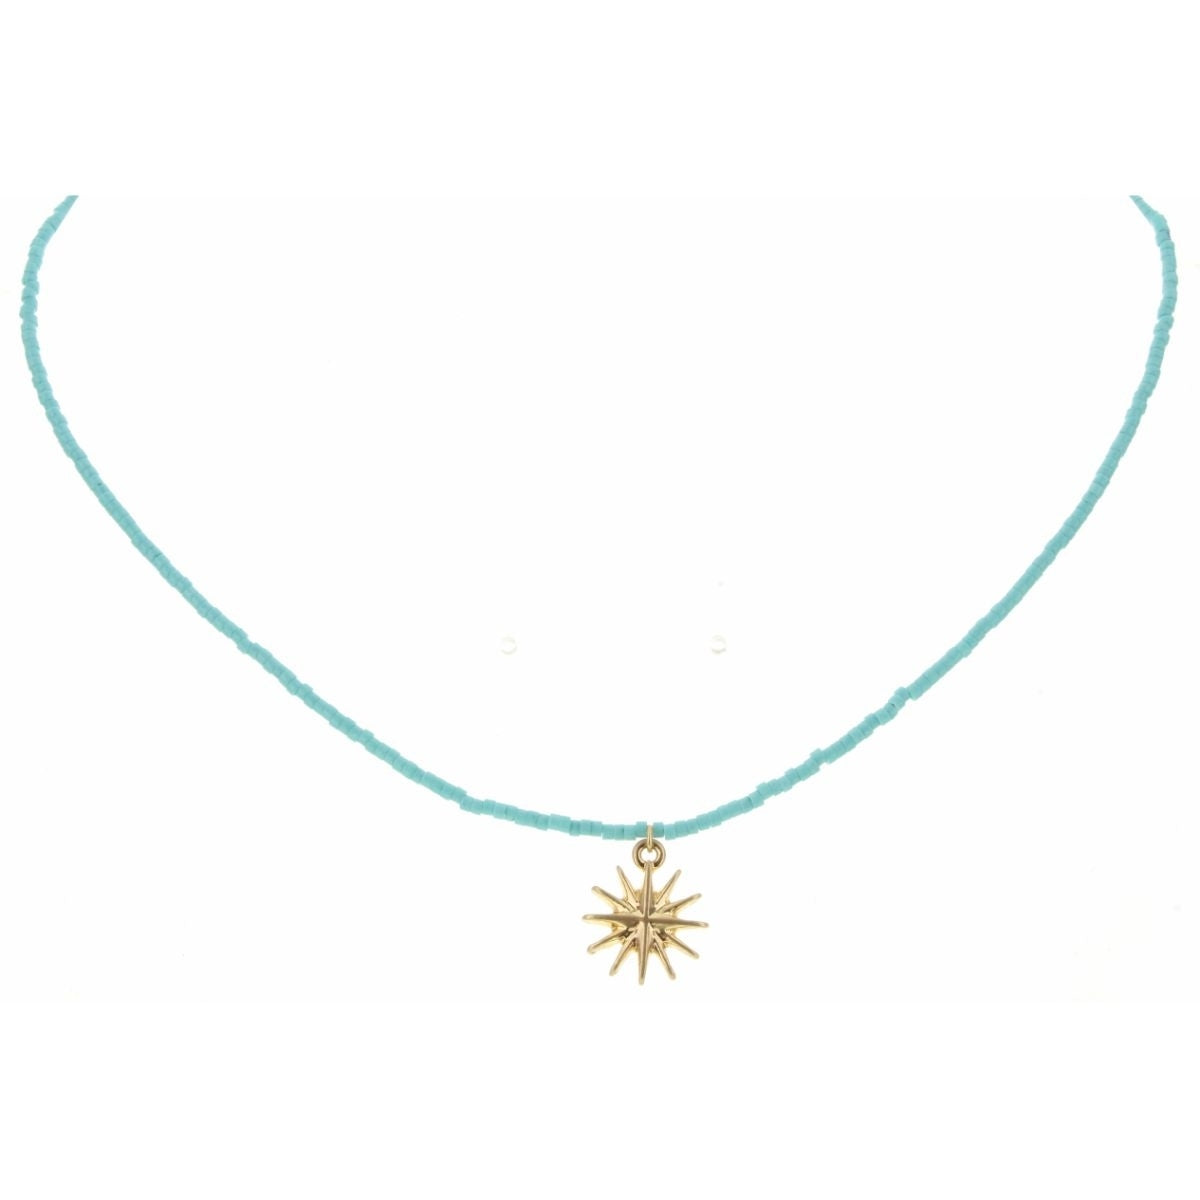 14" Turquoise Seed Bead with Sunburst Charm Necklace